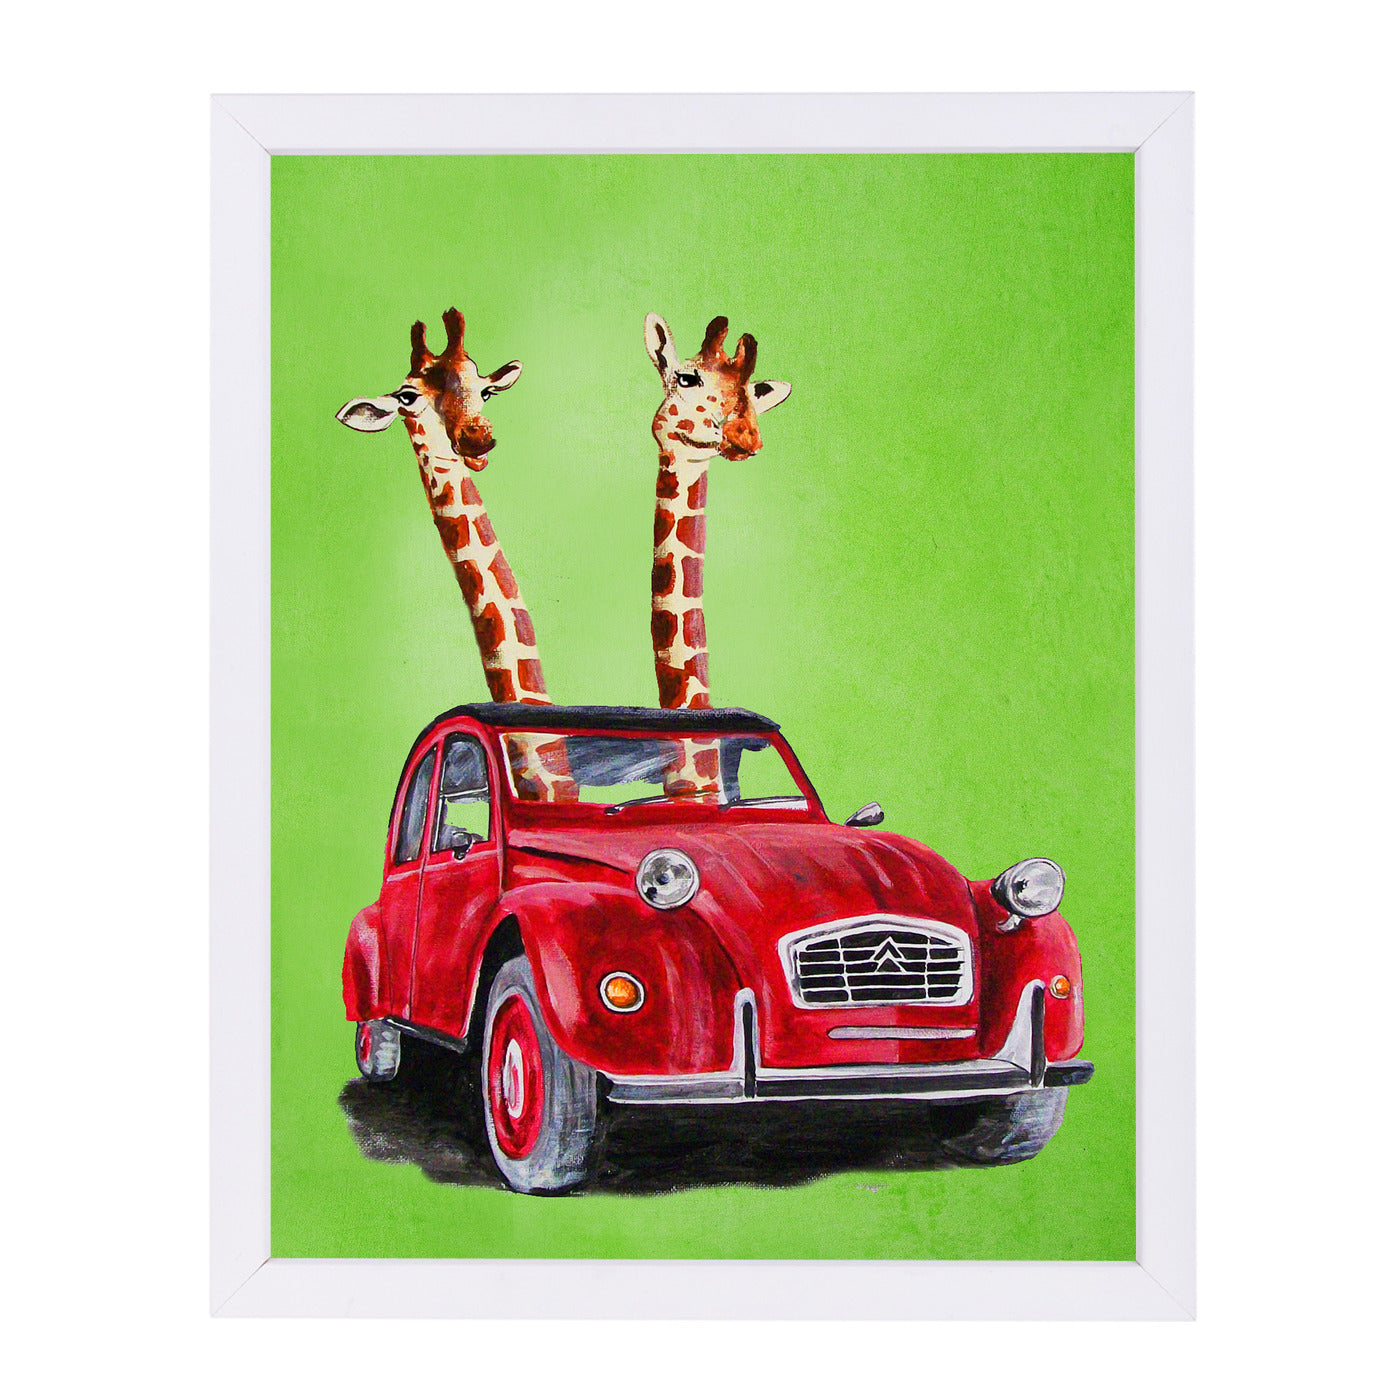 Giraffes In Red Car By Coco De Paris - White Framed Print - Wall Art - Americanflat